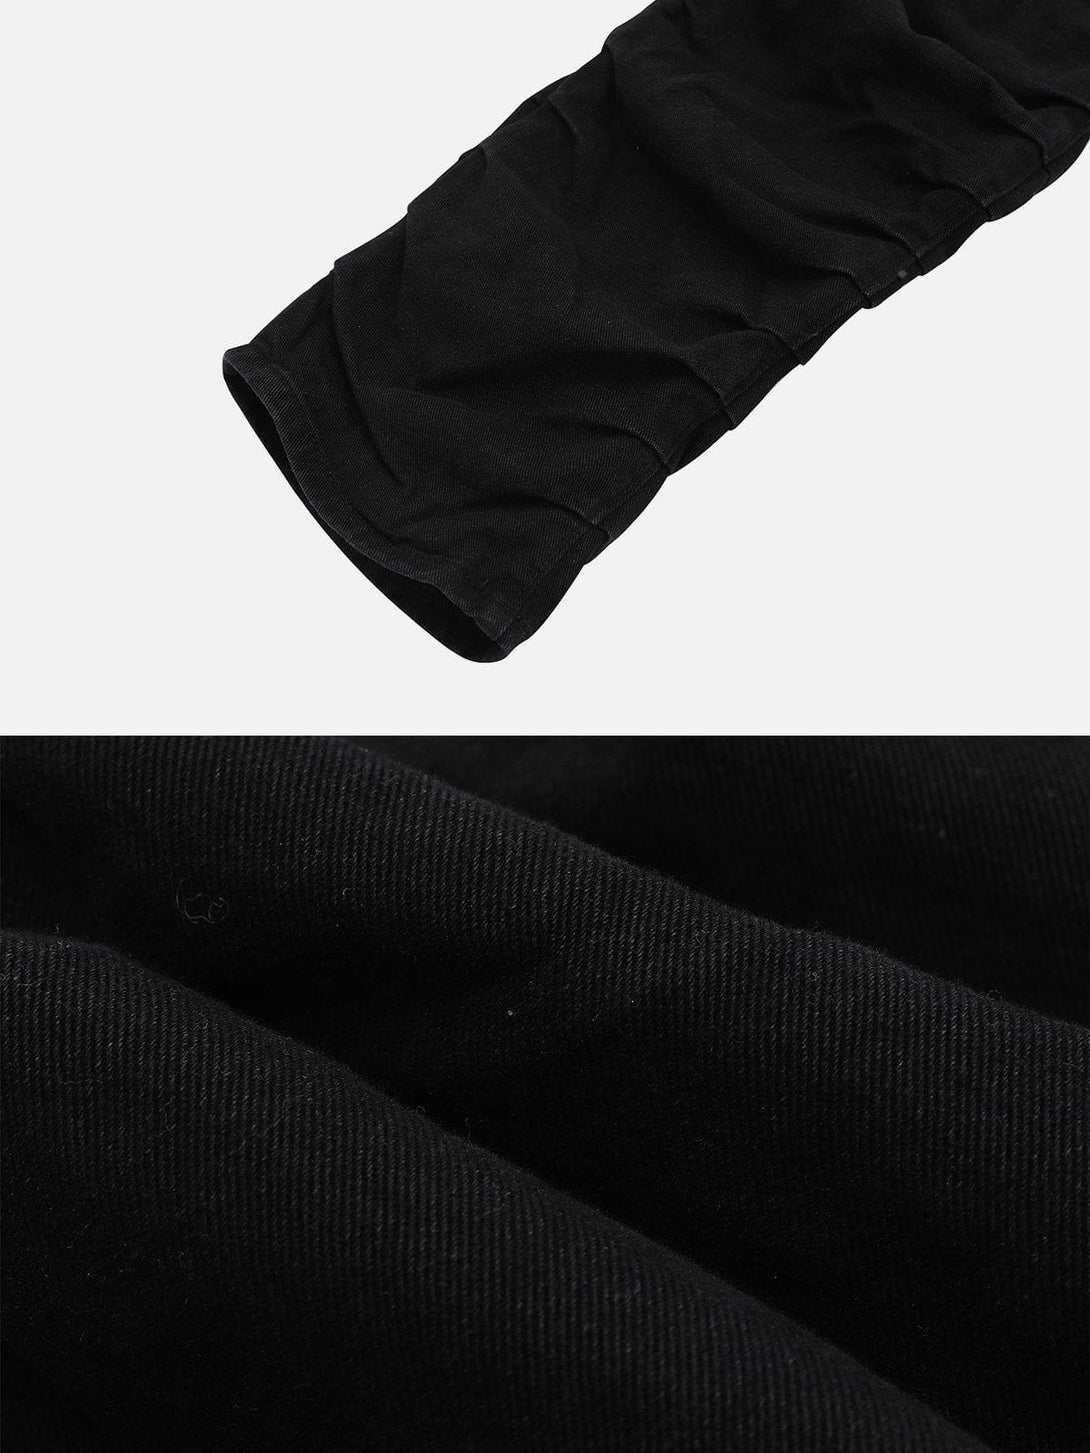 Levefly - Pleated Laminated Design Jeans - Streetwear Fashion - levefly.com